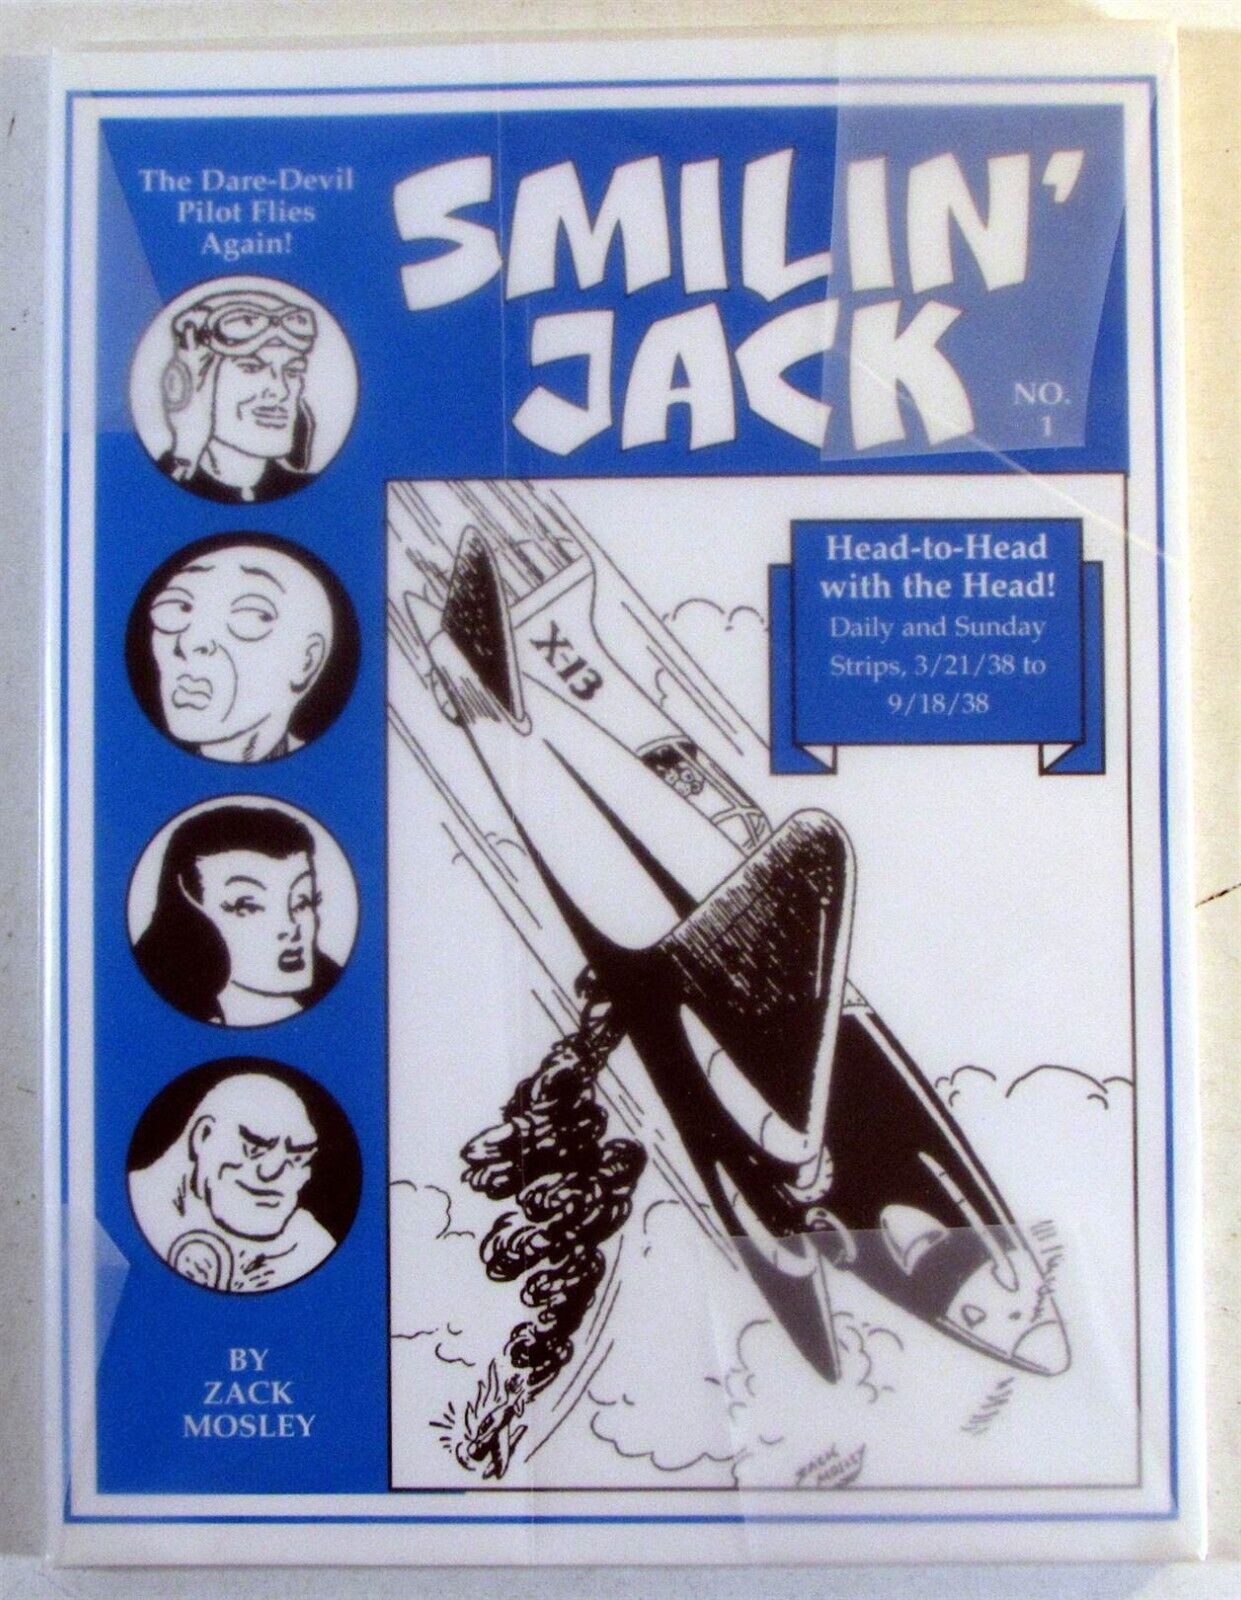 Smilin’ Jack #1 Head-to-Head With The Head 2003 TPB Pacific Comics Zack Mosley